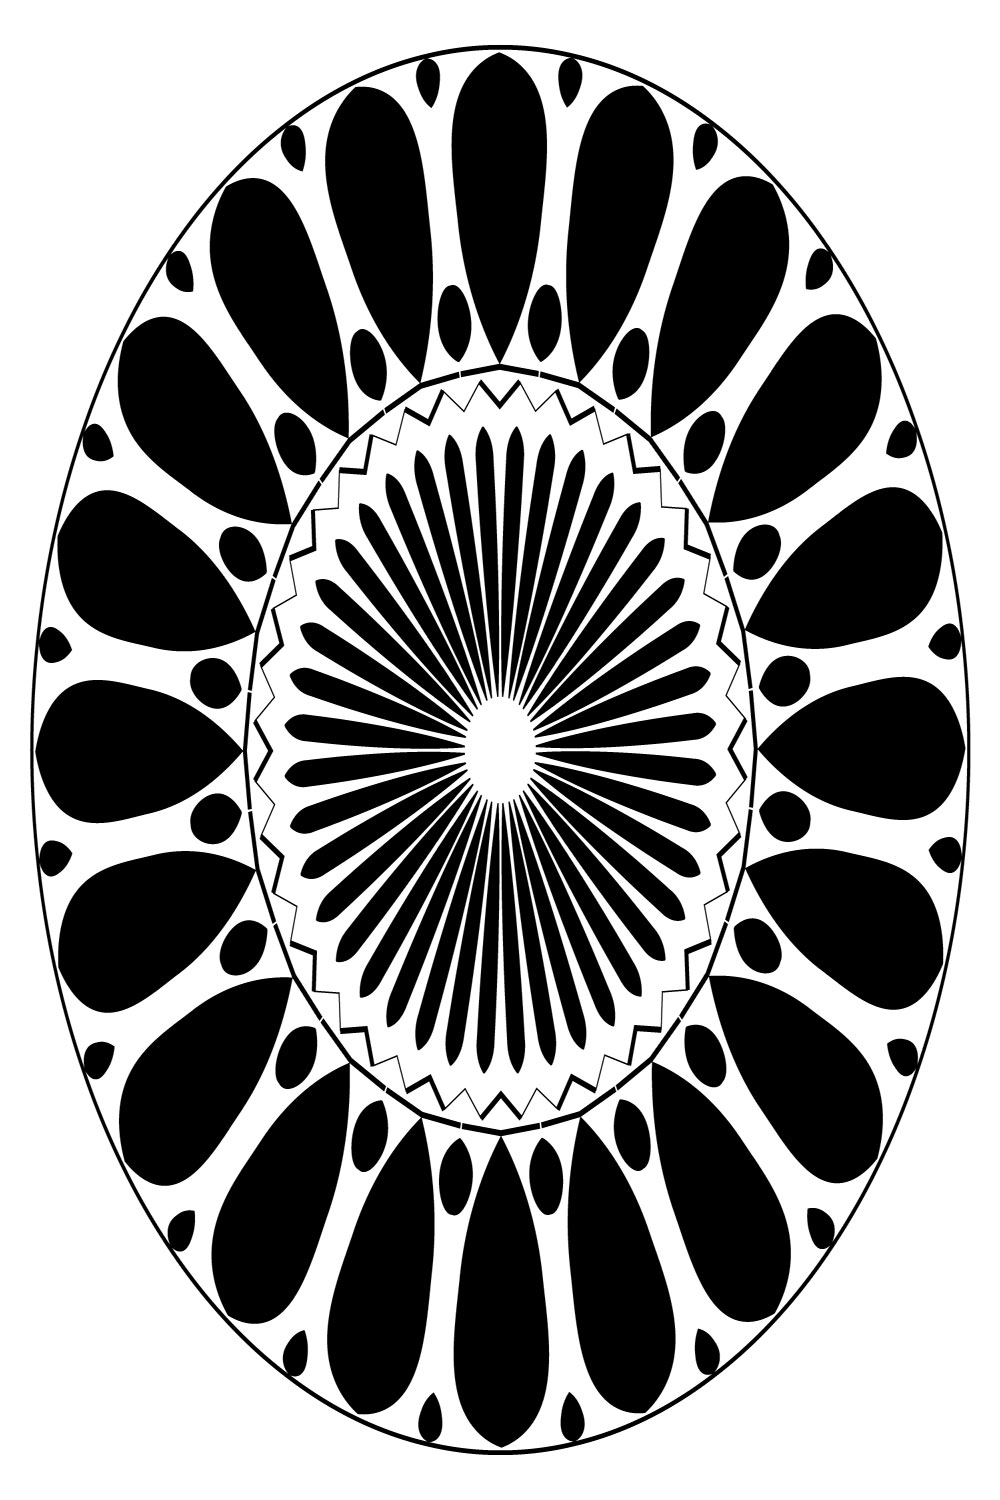 Mandala Art with black and white with middle light pinterest preview image.